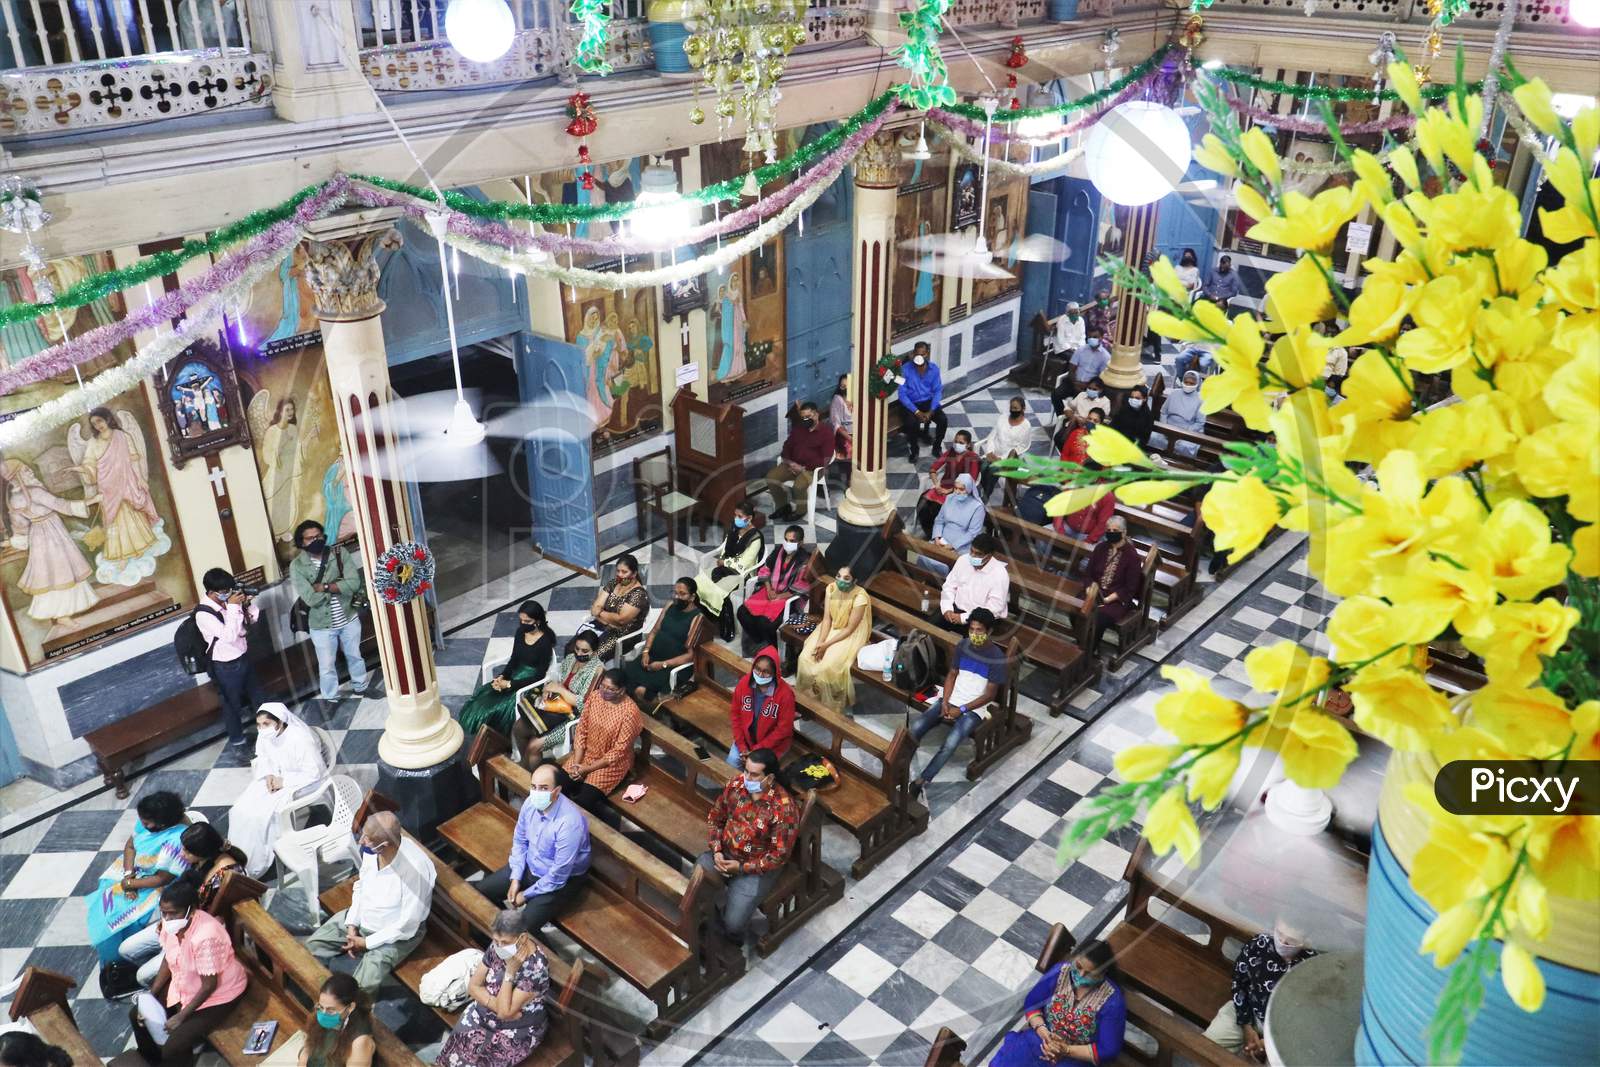 People attend mass as members of India's Christian community celebrate Christmas eve in Mumbai, India, December 24, 2020.